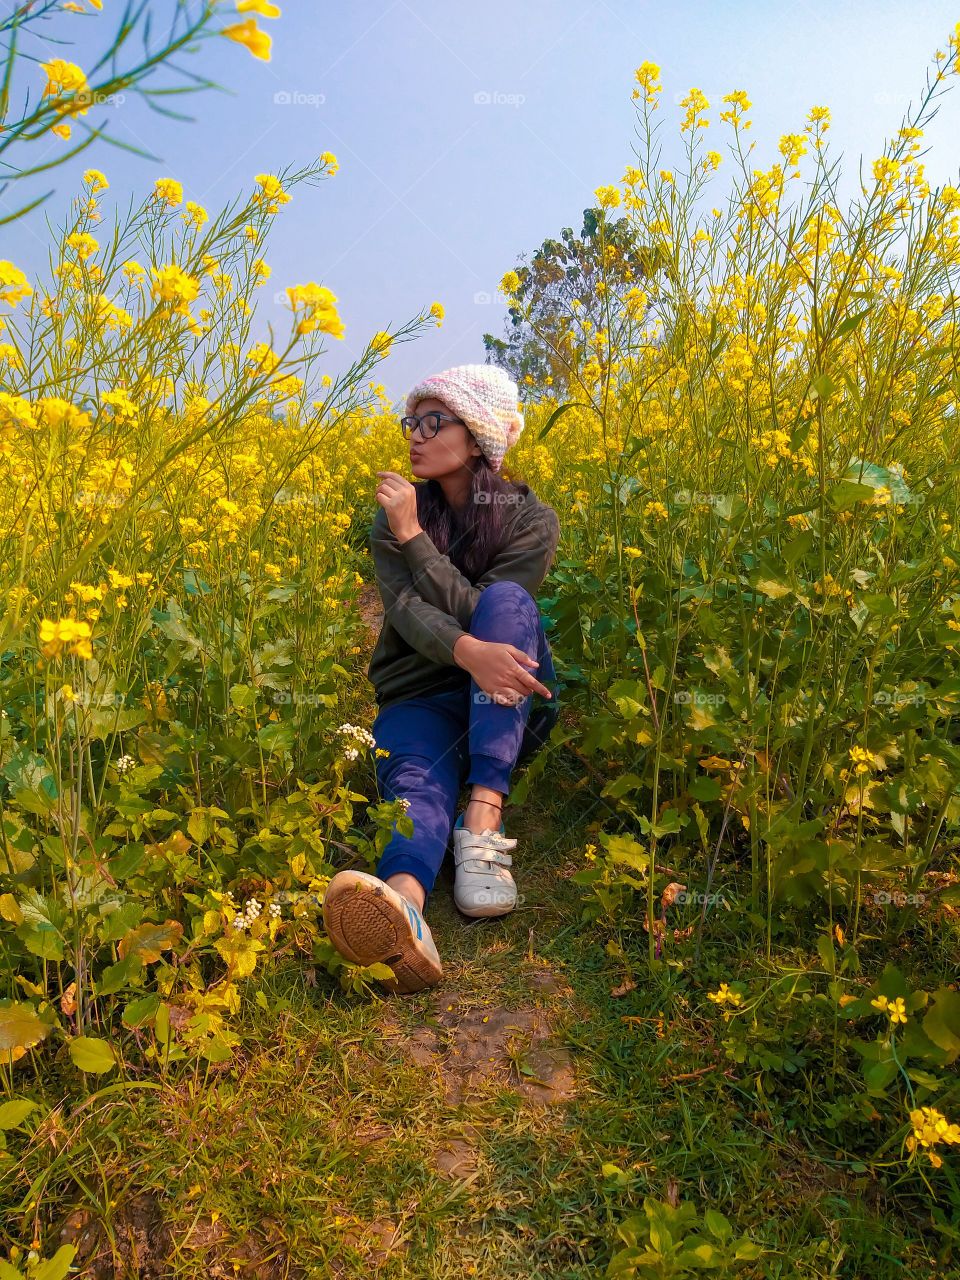 A girl sitting down on a farm of yellow mustards and enjoying mother nature.